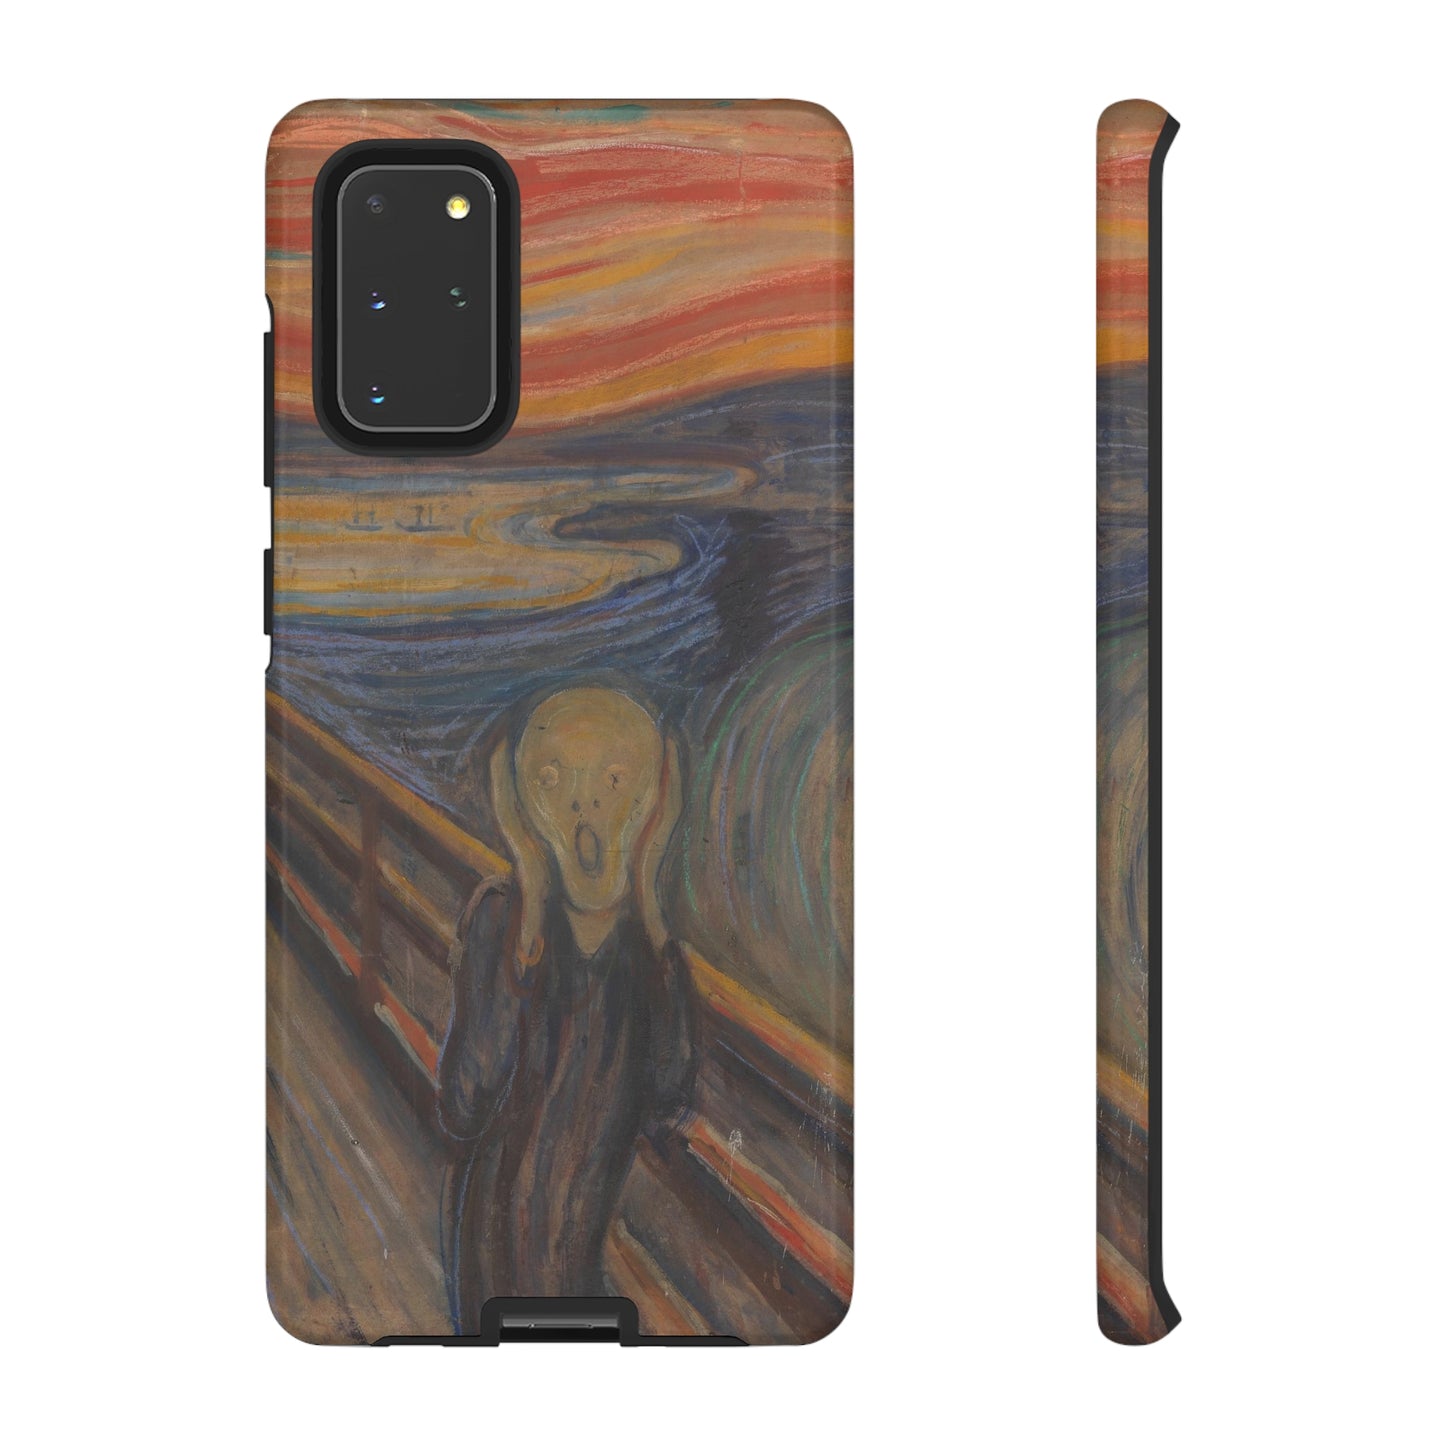 The Scream by Edvard Munch - Cell Phone Case